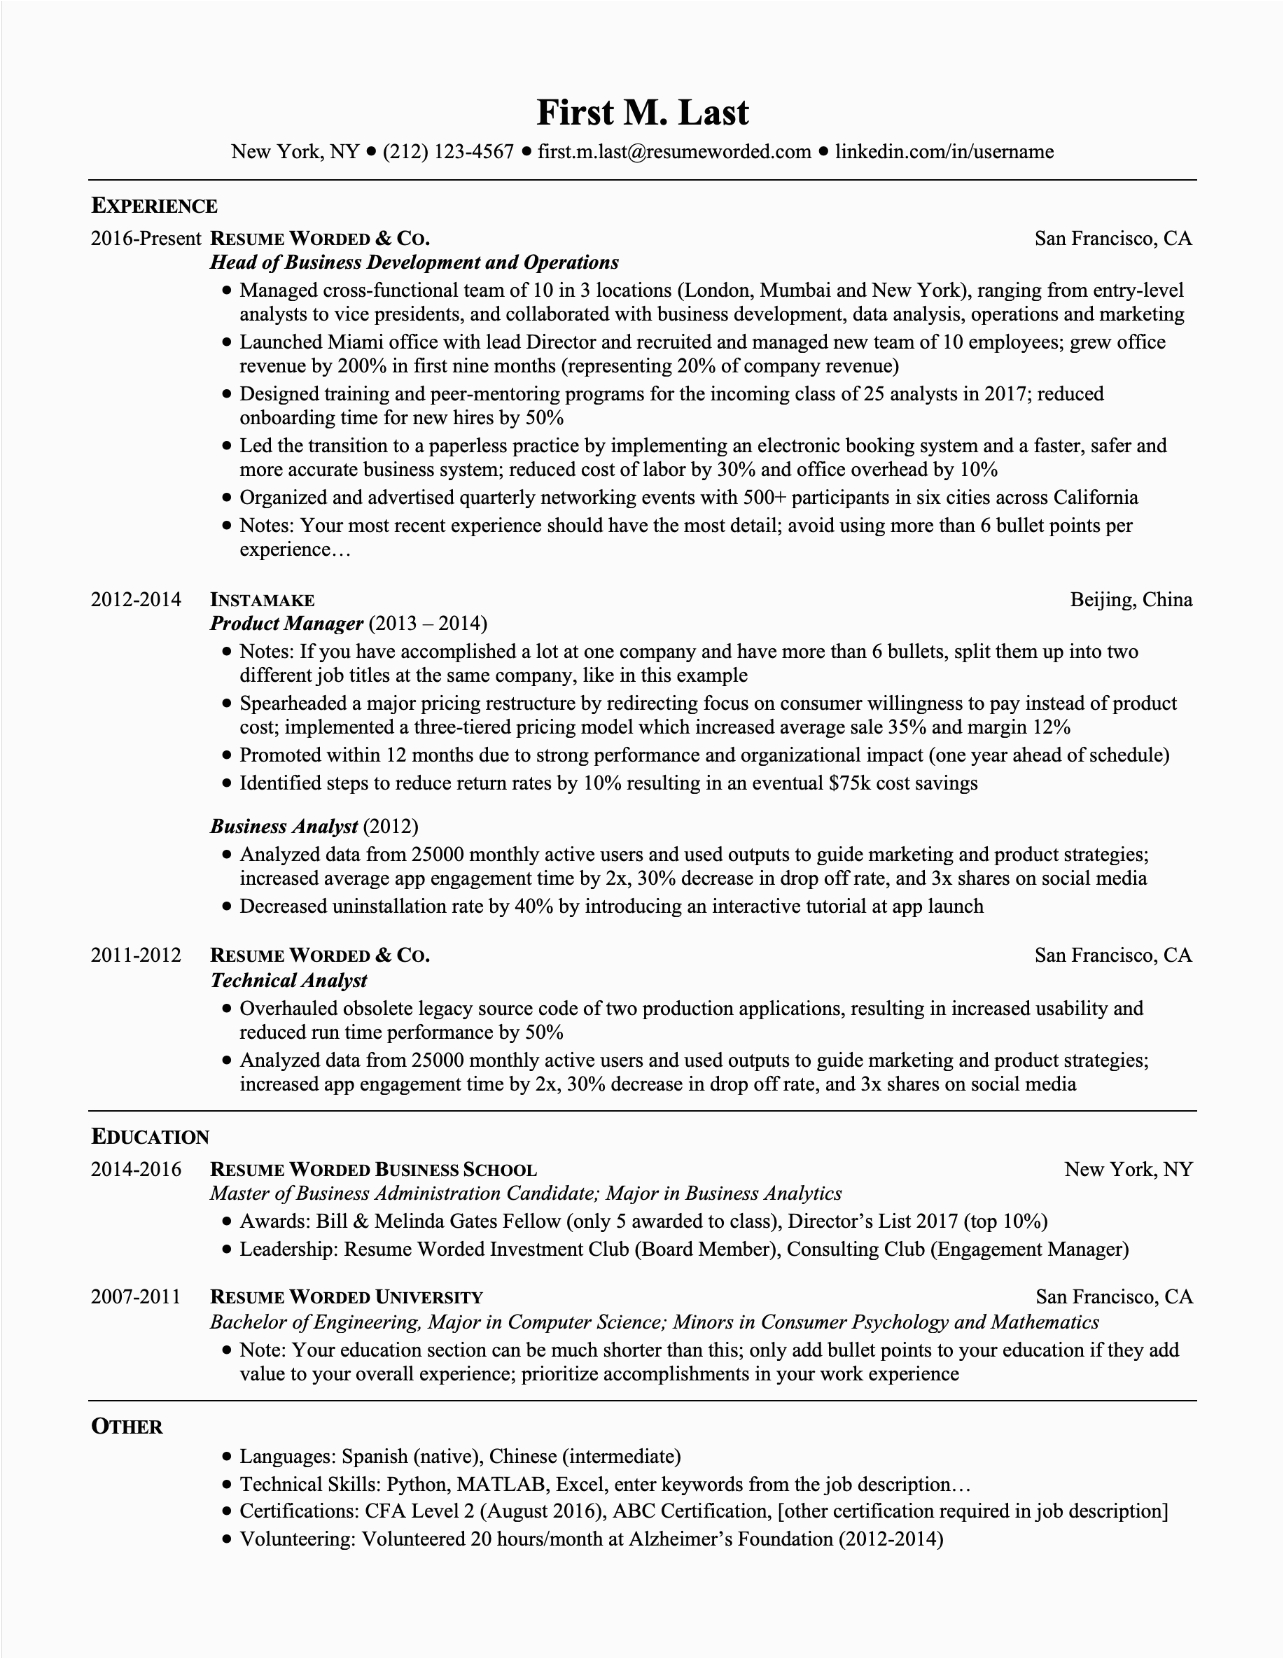 Resume Sample for Multiple Positions In the Same Company Professional Sample Resume Multiple Positions Same Pany